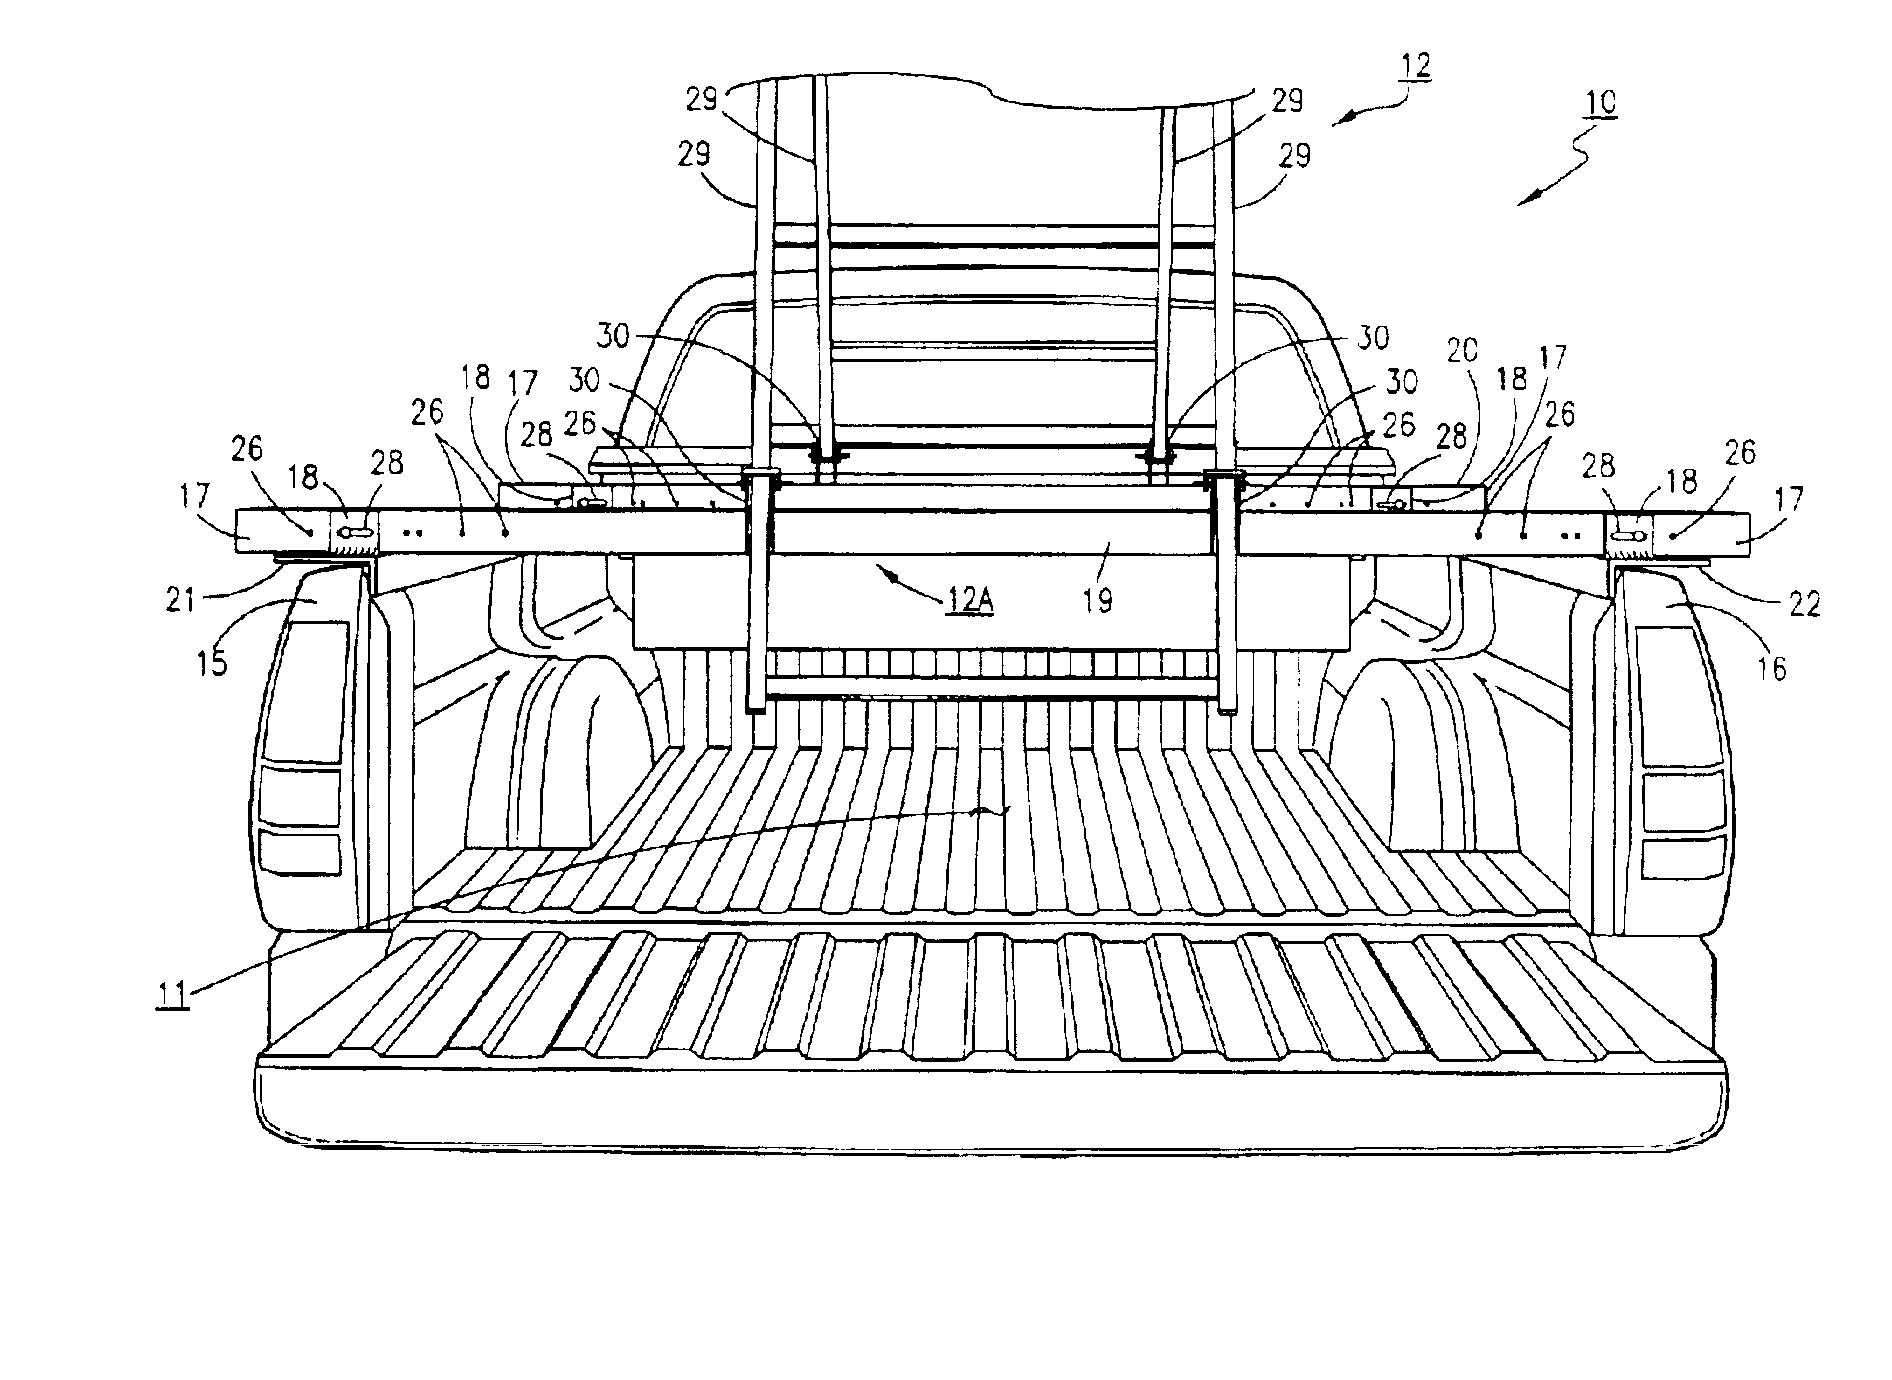 Portable folding observation tower for attachment to a vehicle